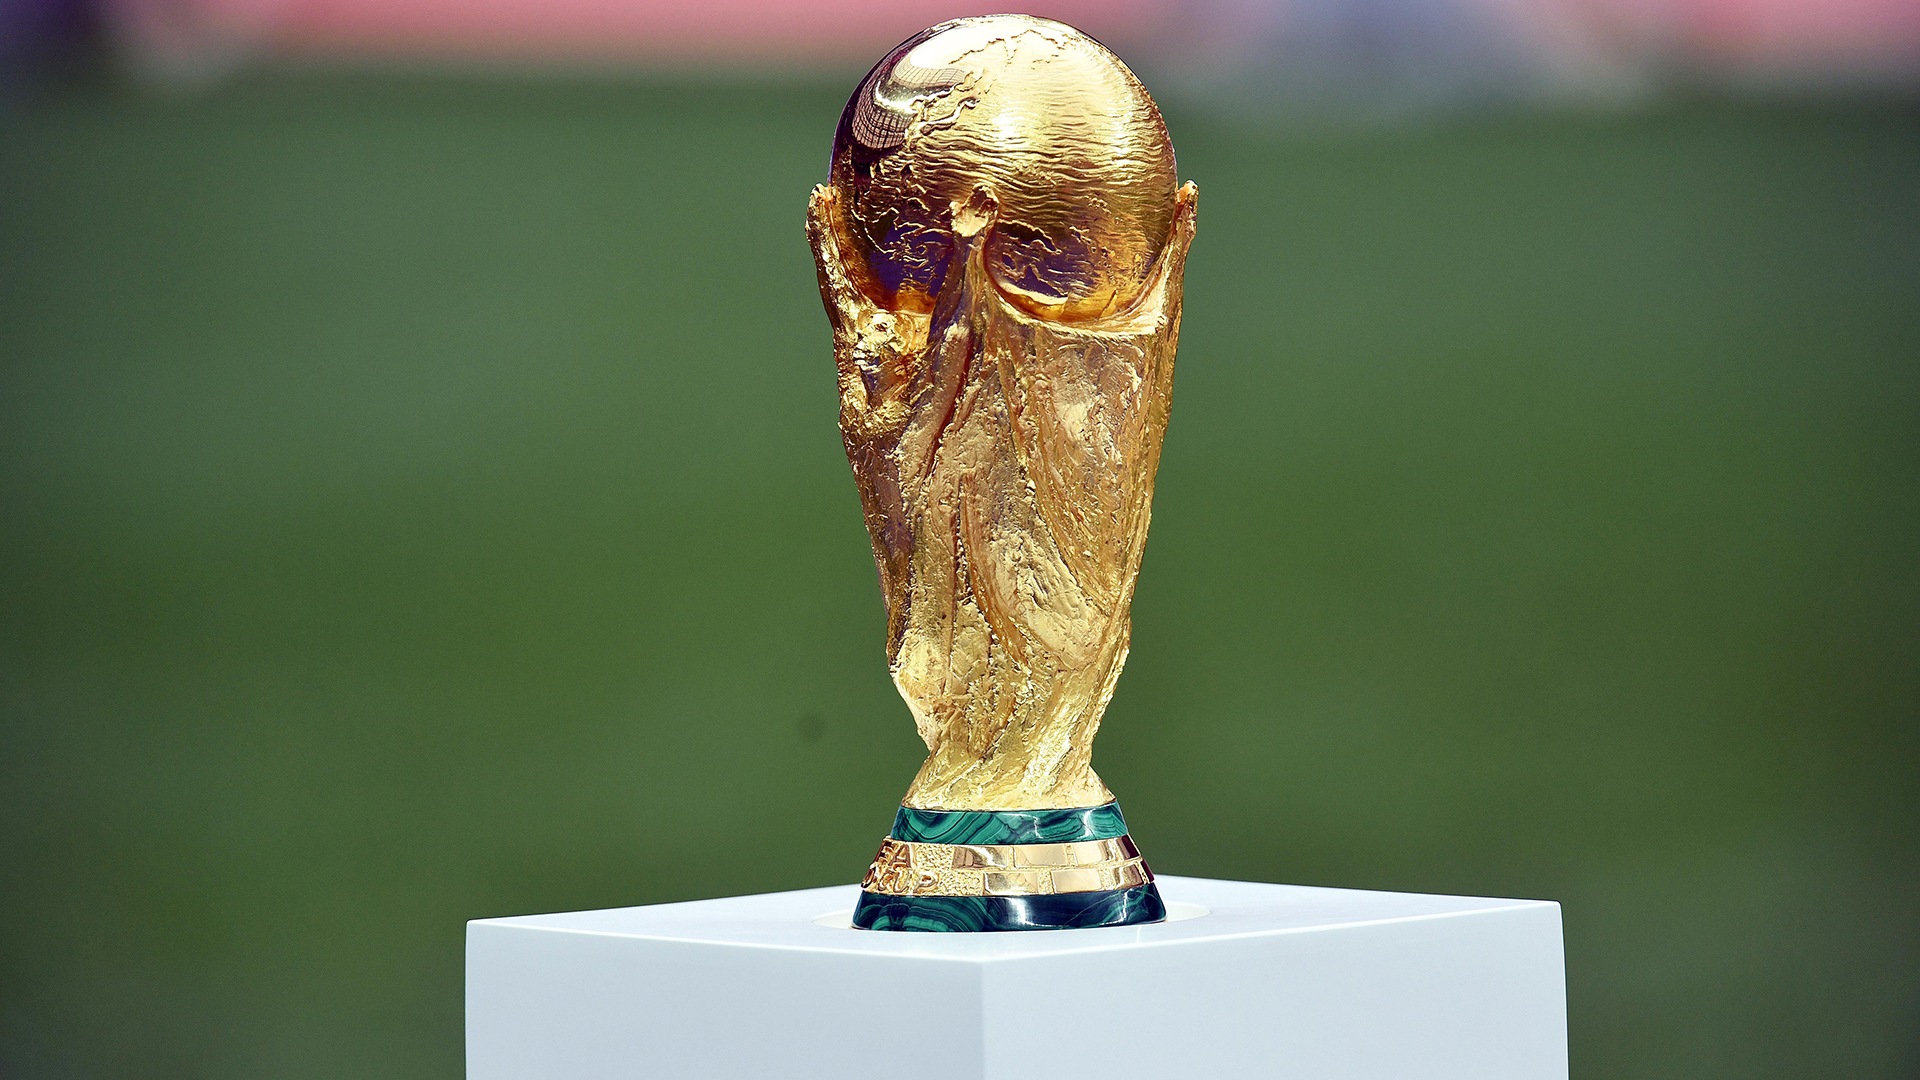 Football World Cup: Which teams have qualified for Qatar 2022?